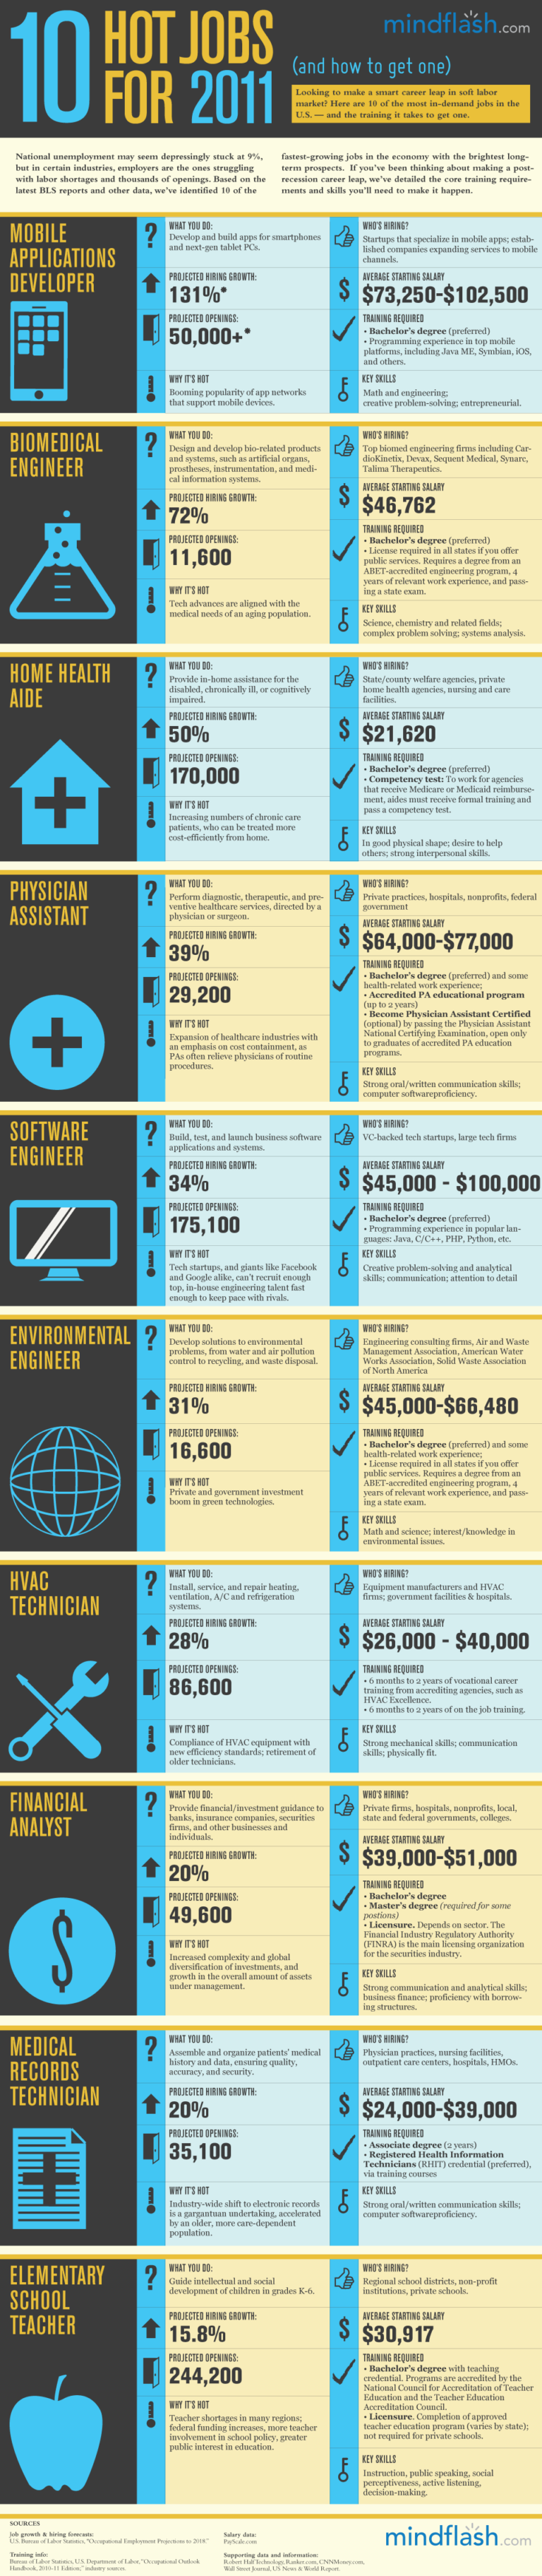 Infographic: 10 Hot Jobs for 2011 (and How to Get One)